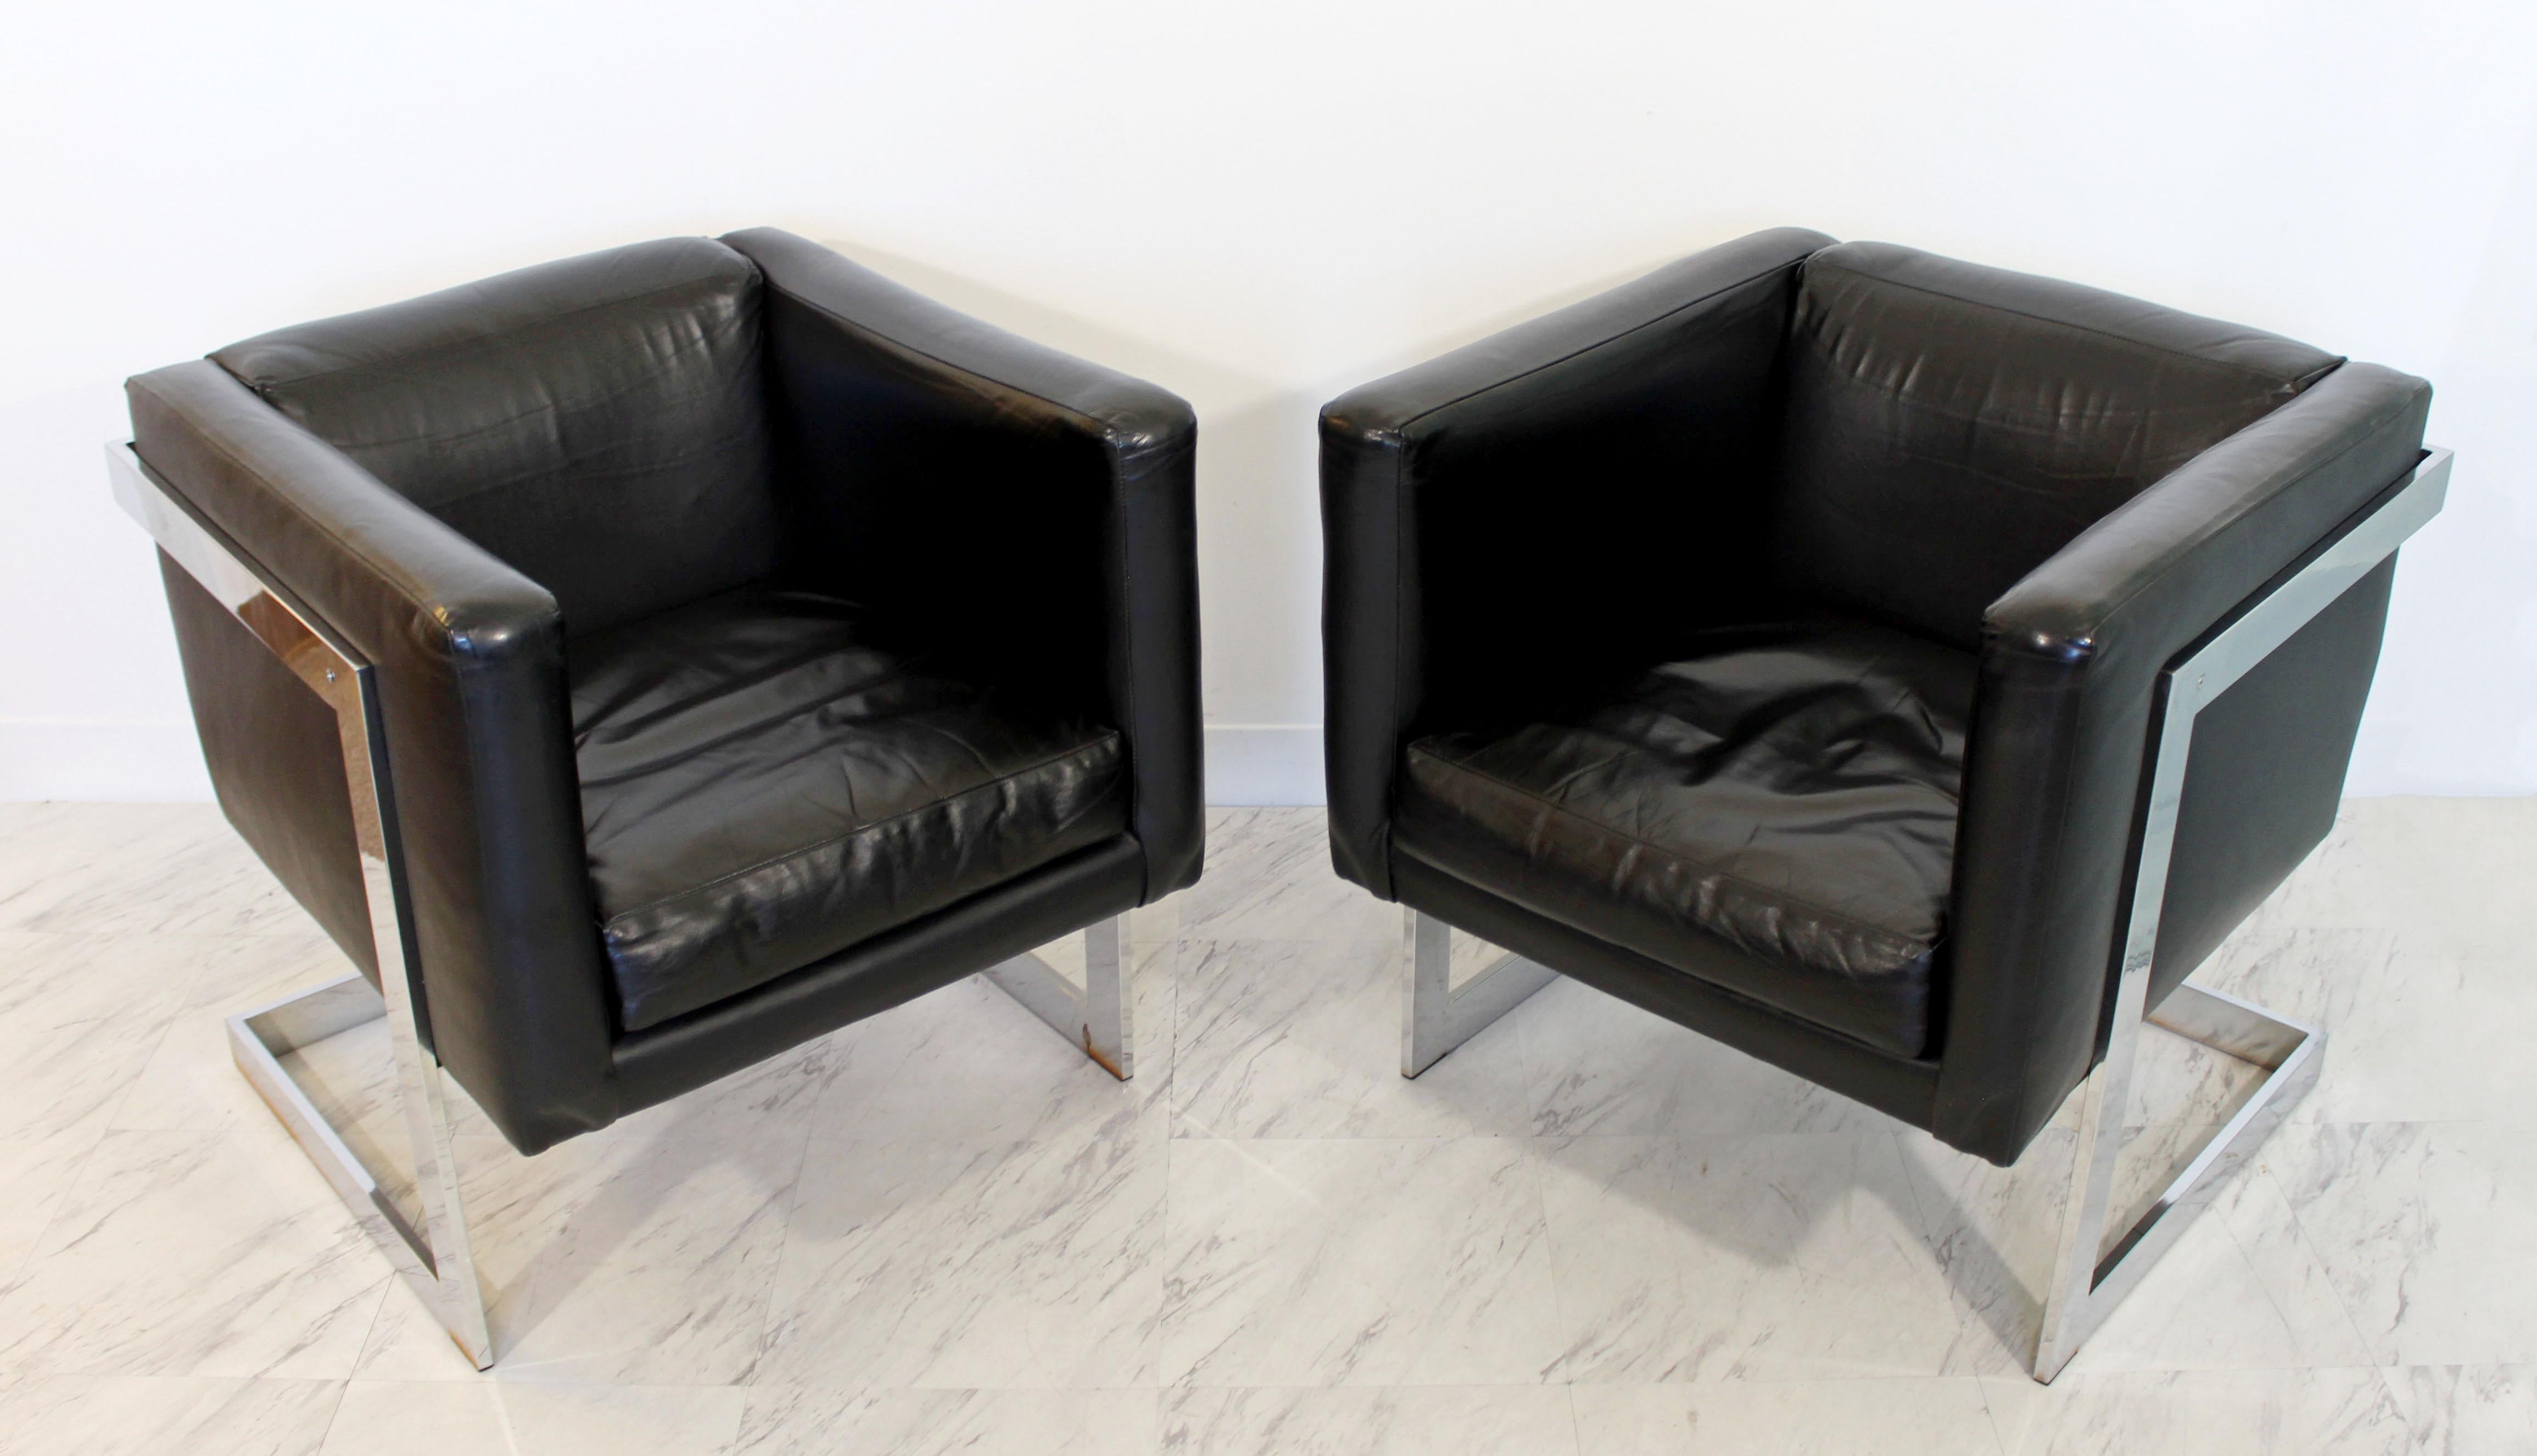 For your consideration is a fabulous pair of cube armchairs, on chrome bases and with black leather upholstery, by Milo Baughman, circa 1970s. In very good condition. The dimensions are 23